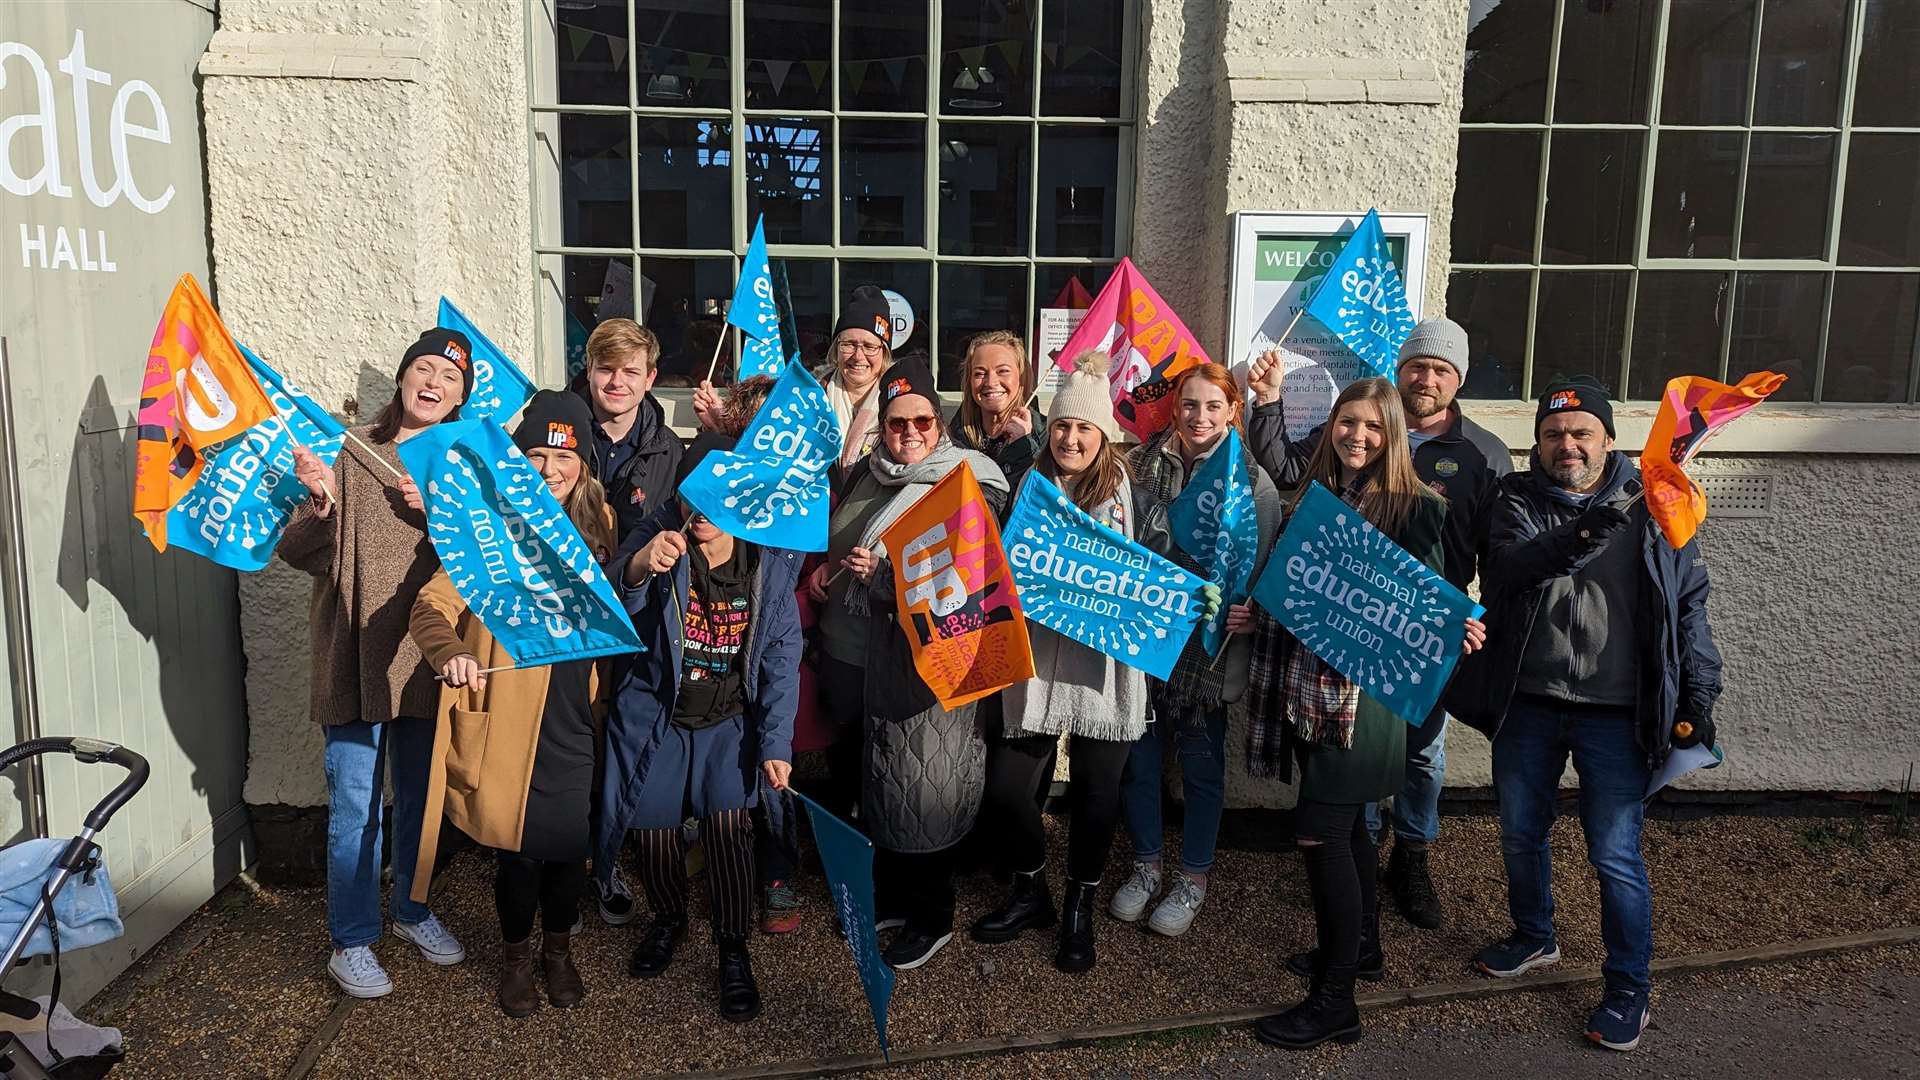 Teachers from St. Nicholas School in Wincheap, Canterbury during the day of national teachers' strikes march in Canterbury